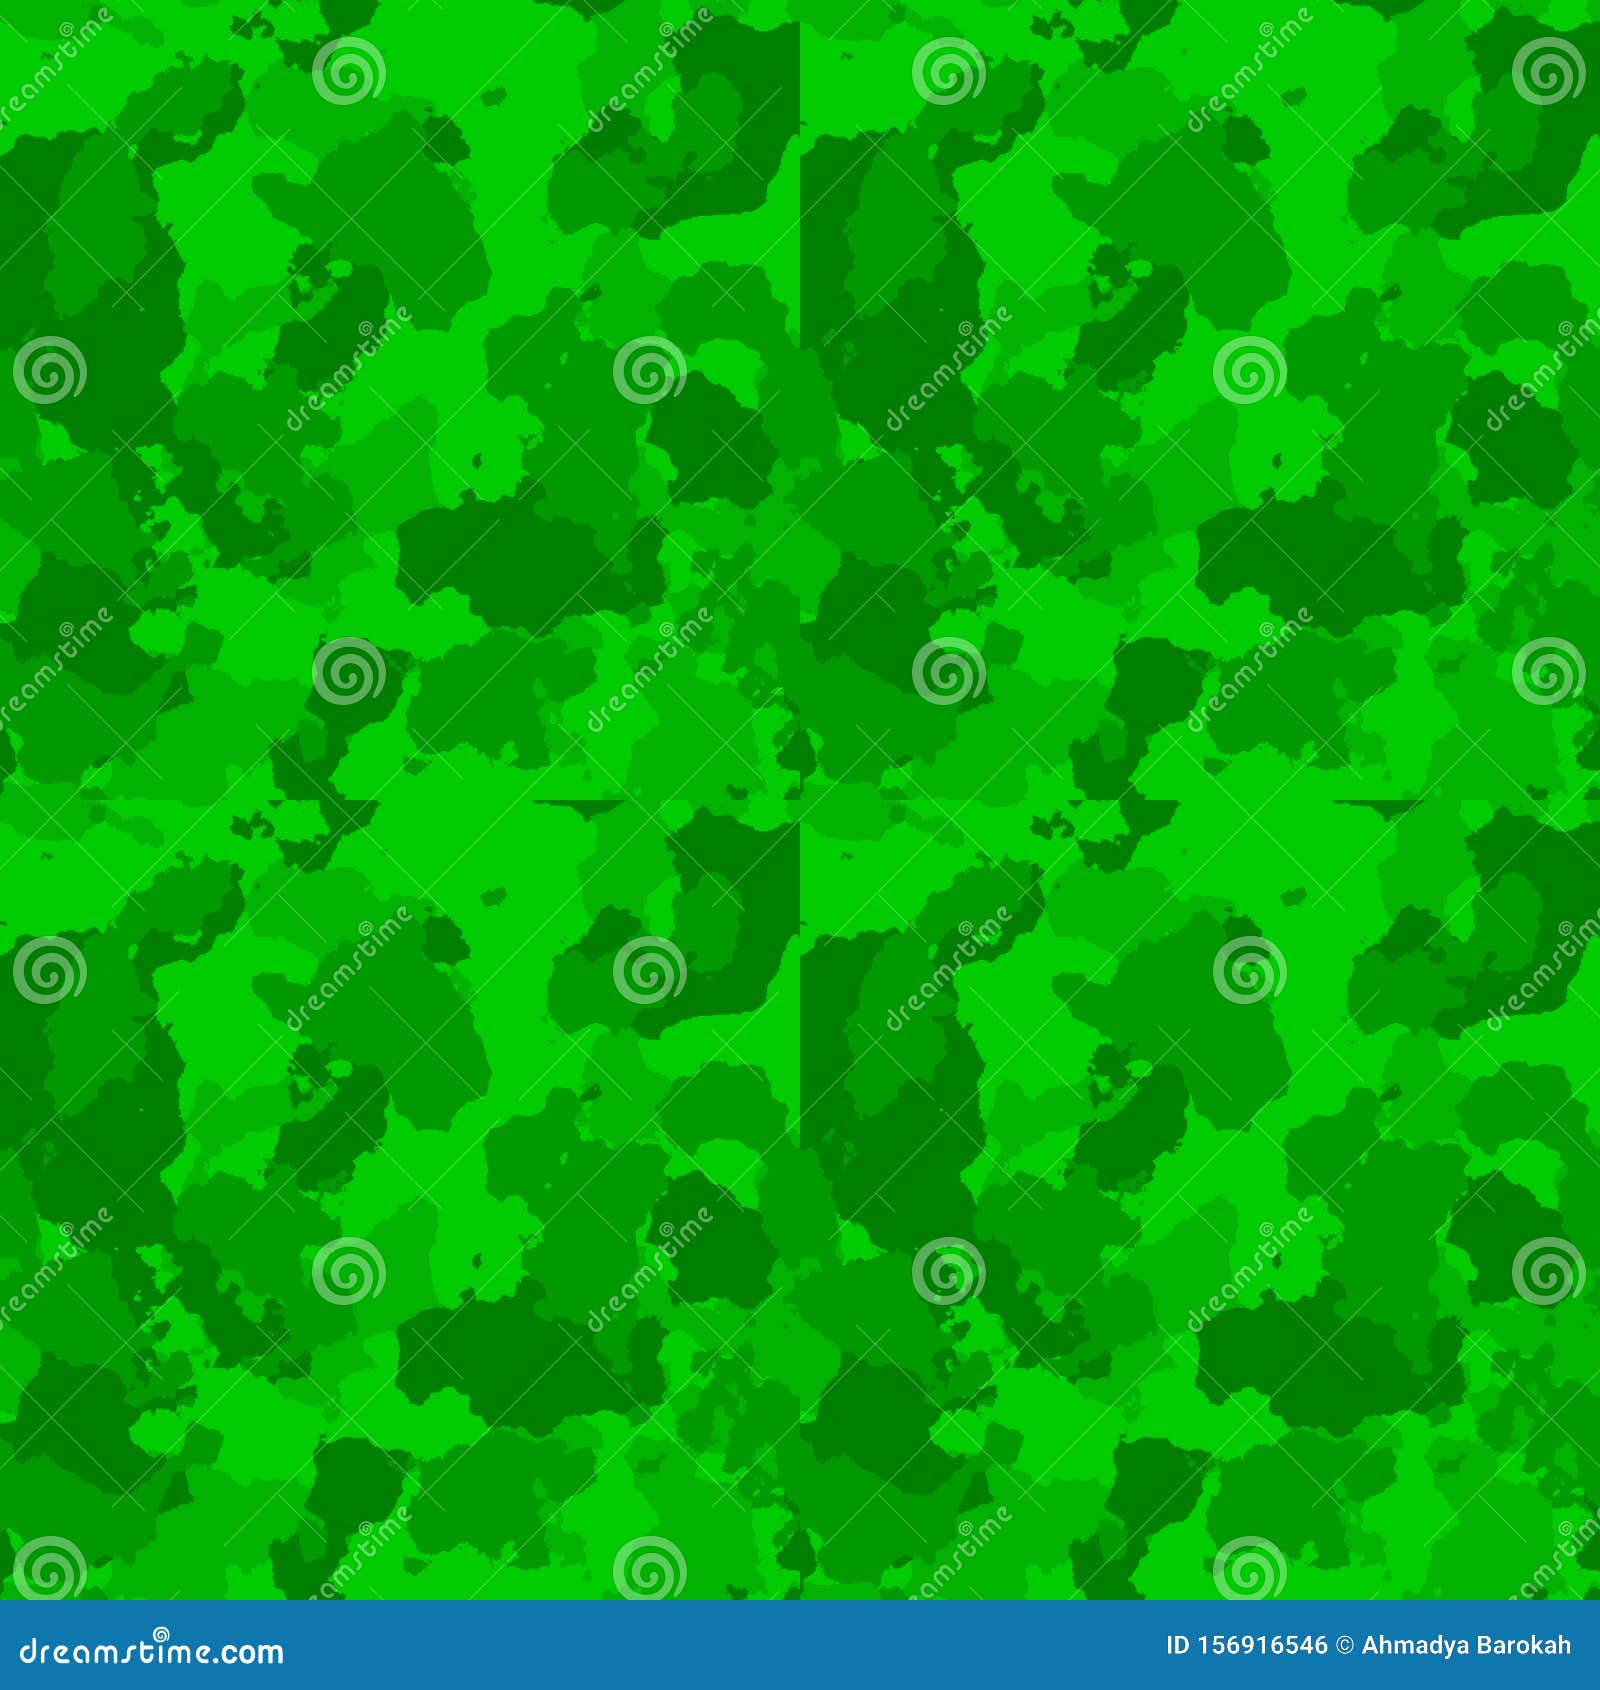 military camouflage for the background